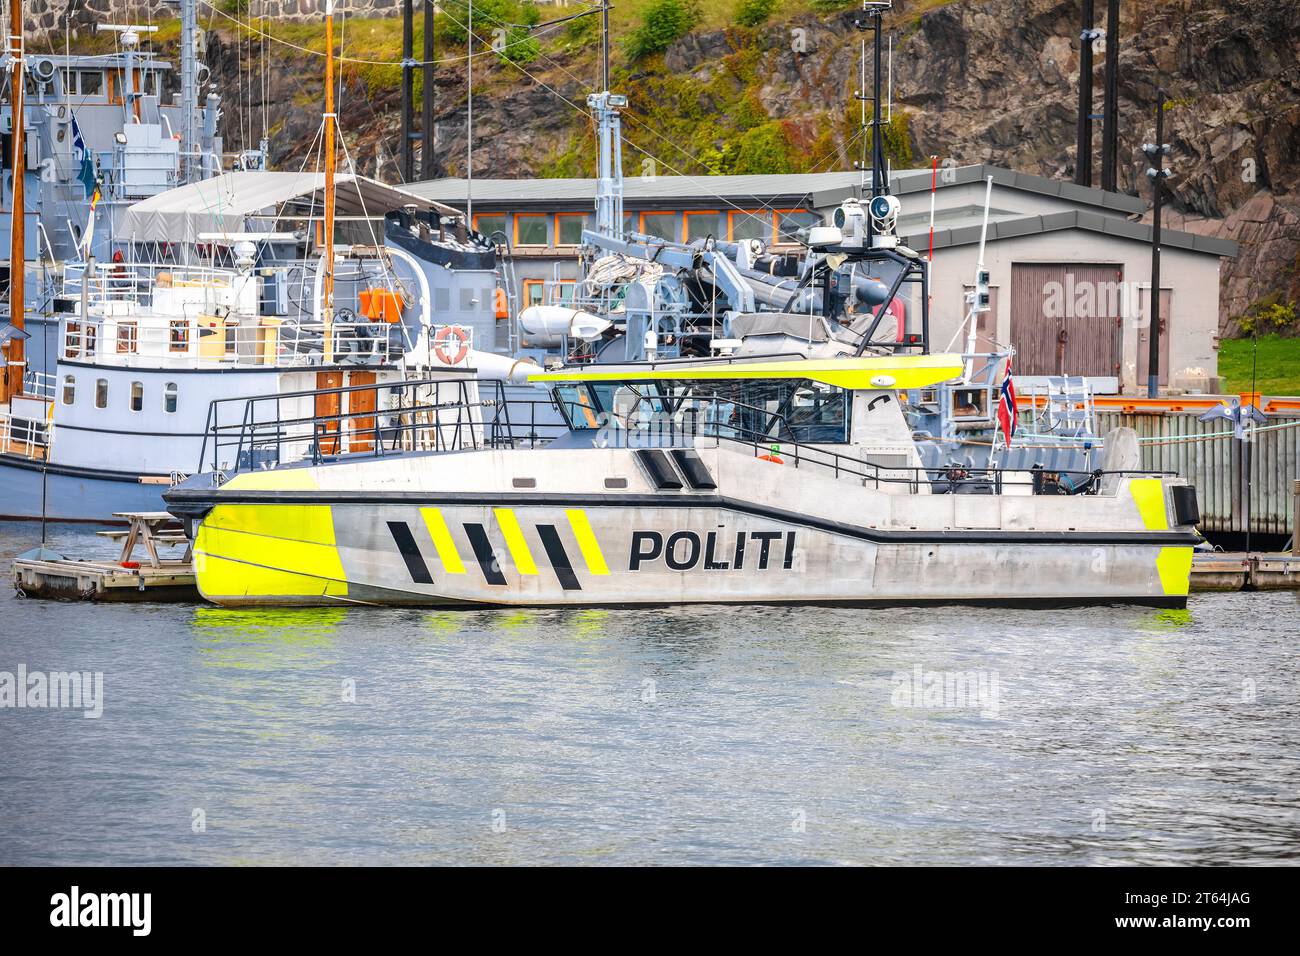 Norway maritime police boat in Oslo harbor view, archipelago of Norway Stock Photo